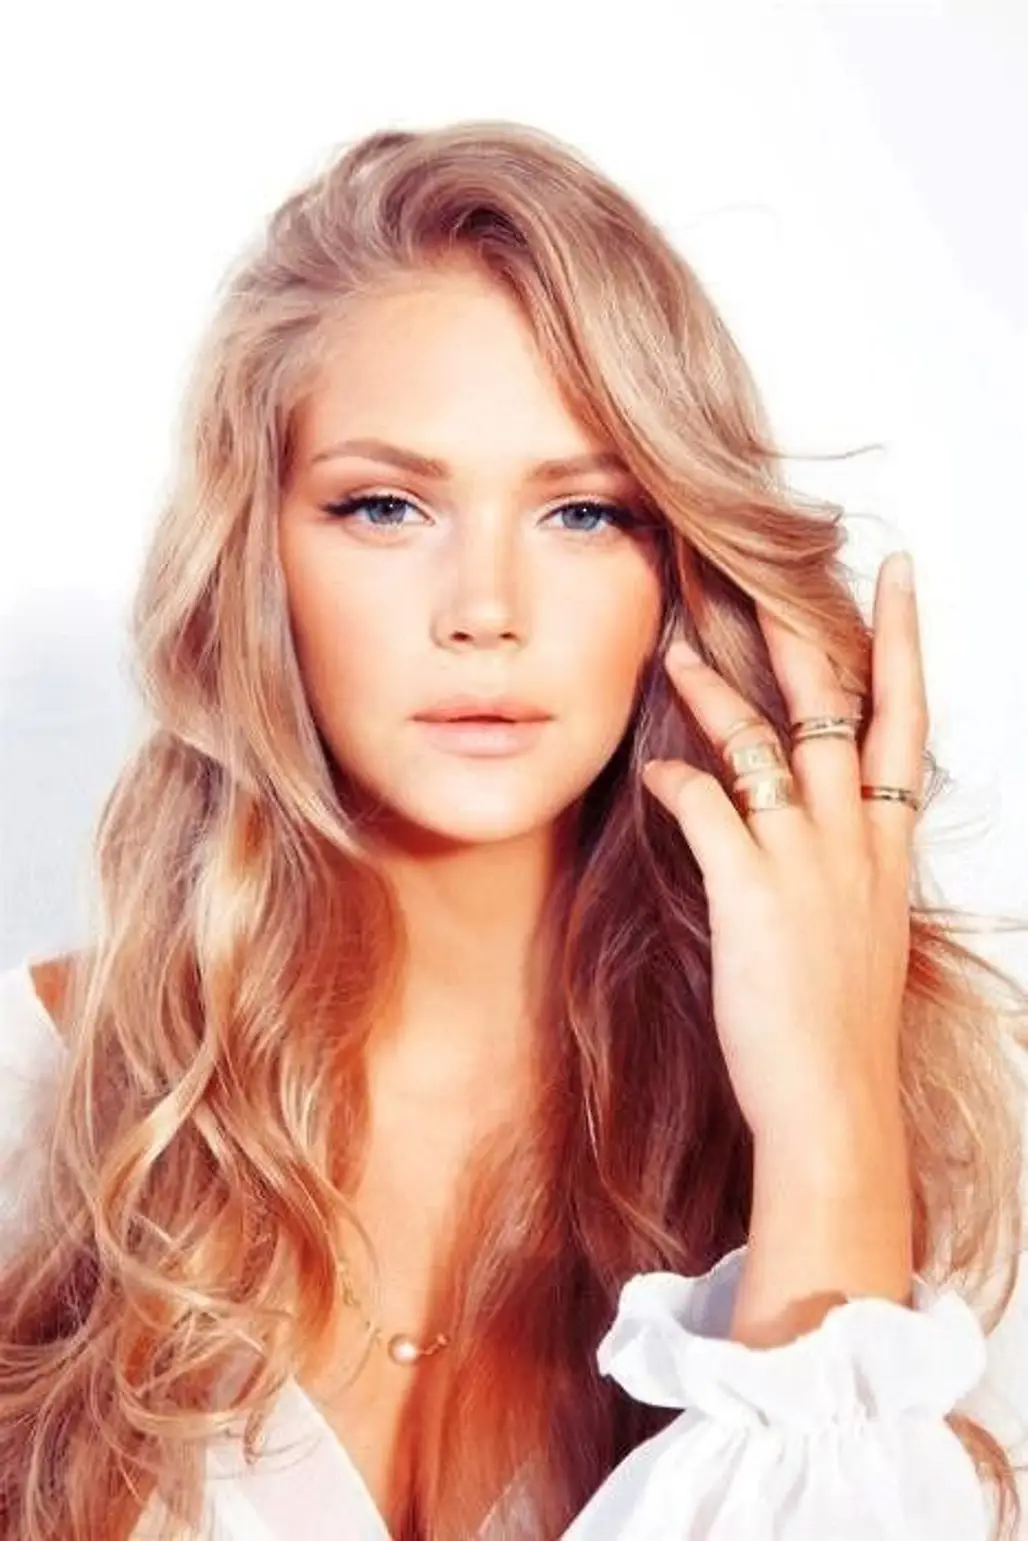 hair,human hair color,face,blond,hairstyle,